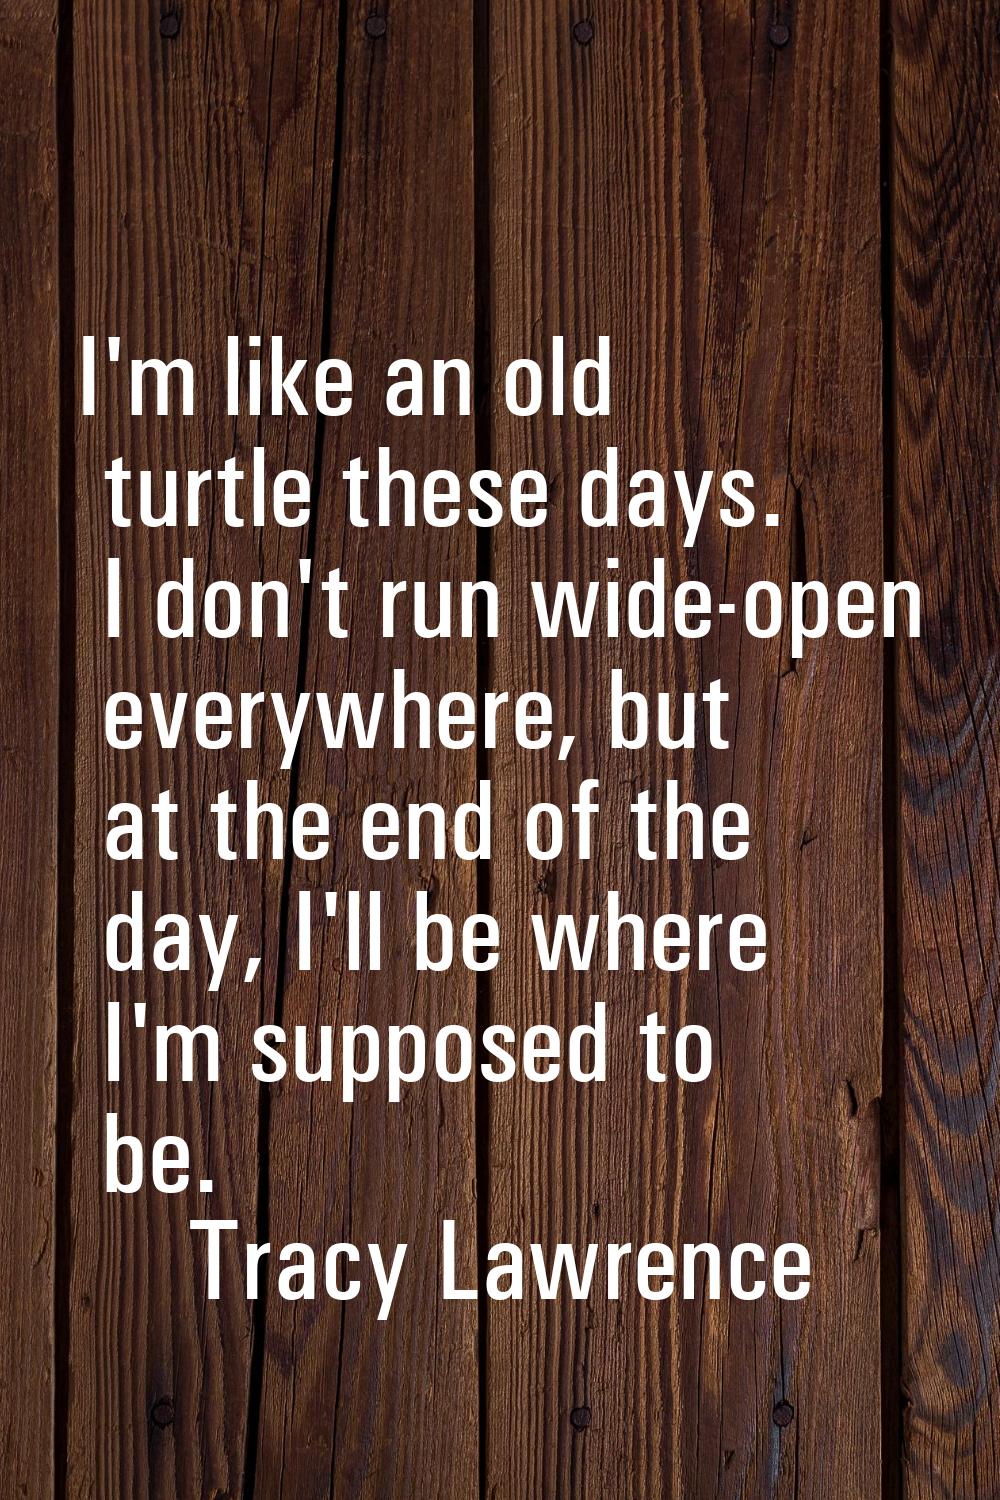 I'm like an old turtle these days. I don't run wide-open everywhere, but at the end of the day, I'l